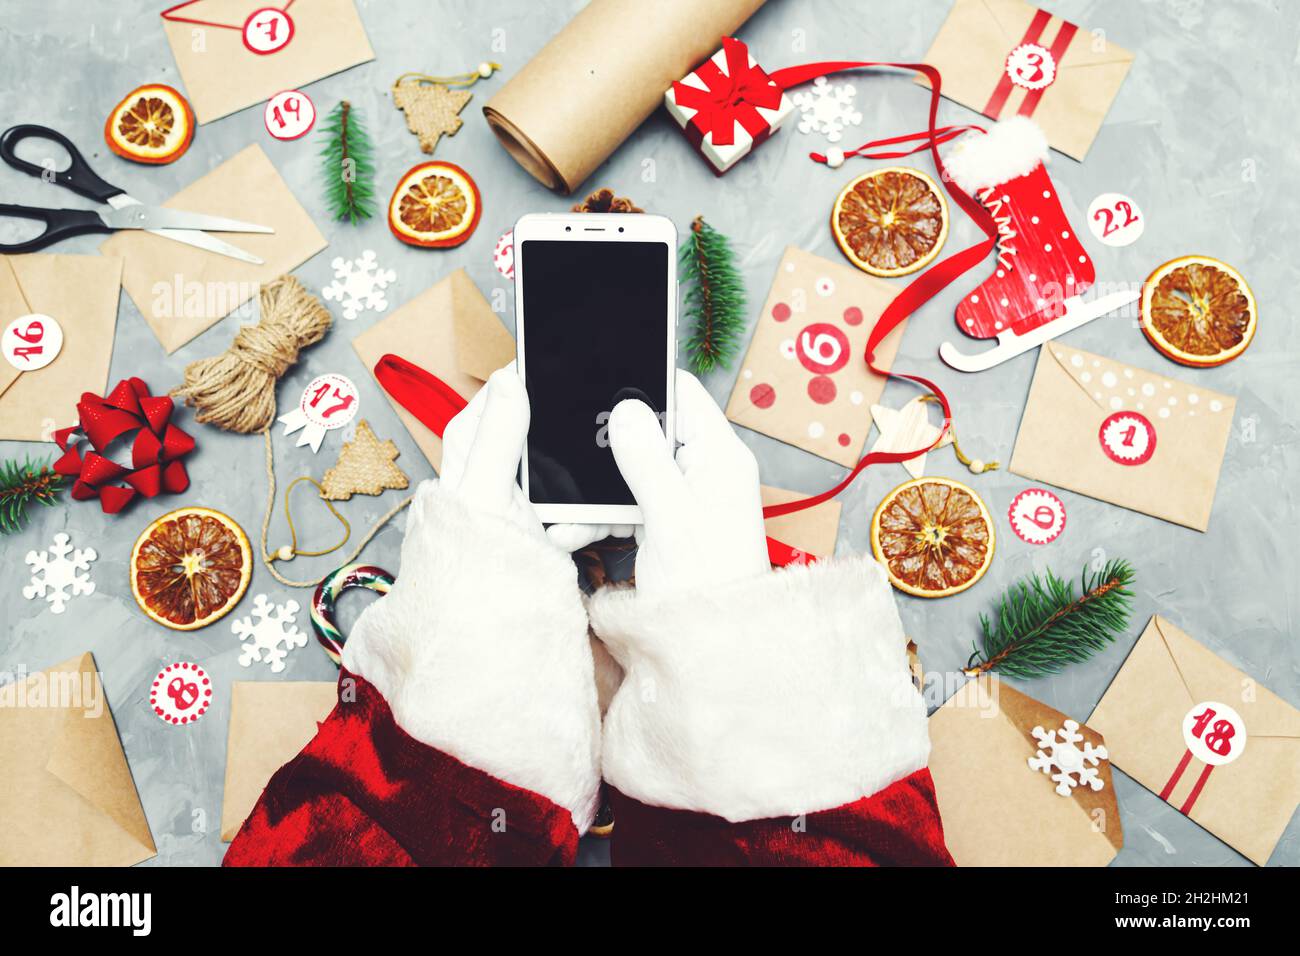 Hands of Santa Claus with a phone. Preparing the Advent Calendar.  Seasonal Christmas tradition. Flat lay, top view. Stock Photo